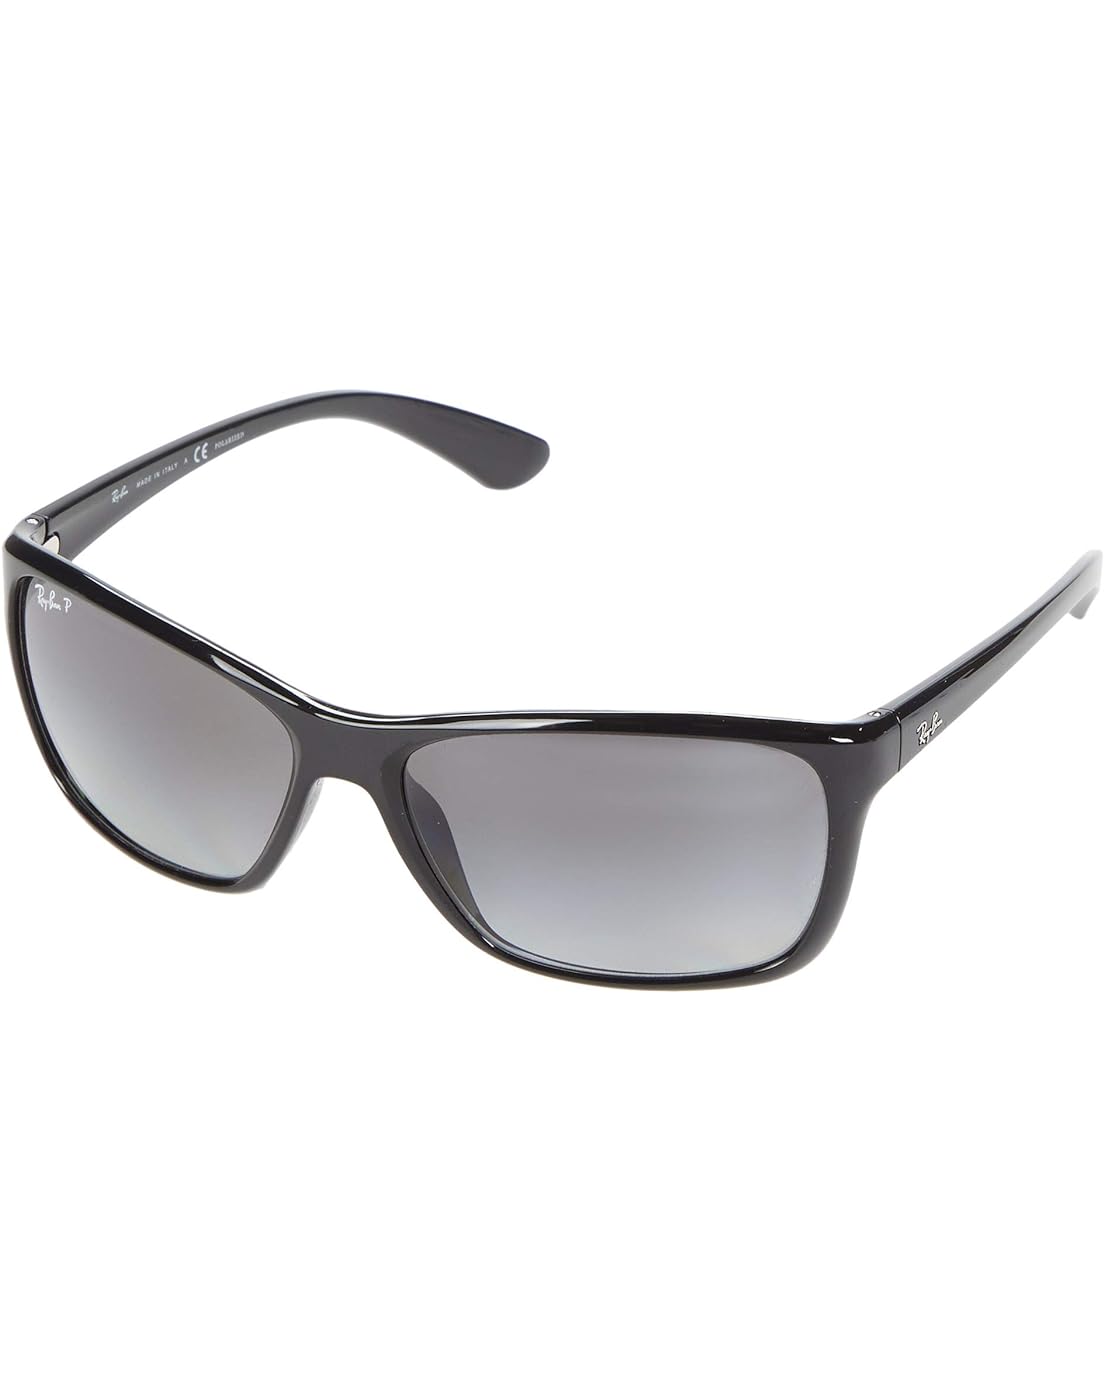 Ray-Ban 61 mm RB4331 Square Sunglasses - Polarized